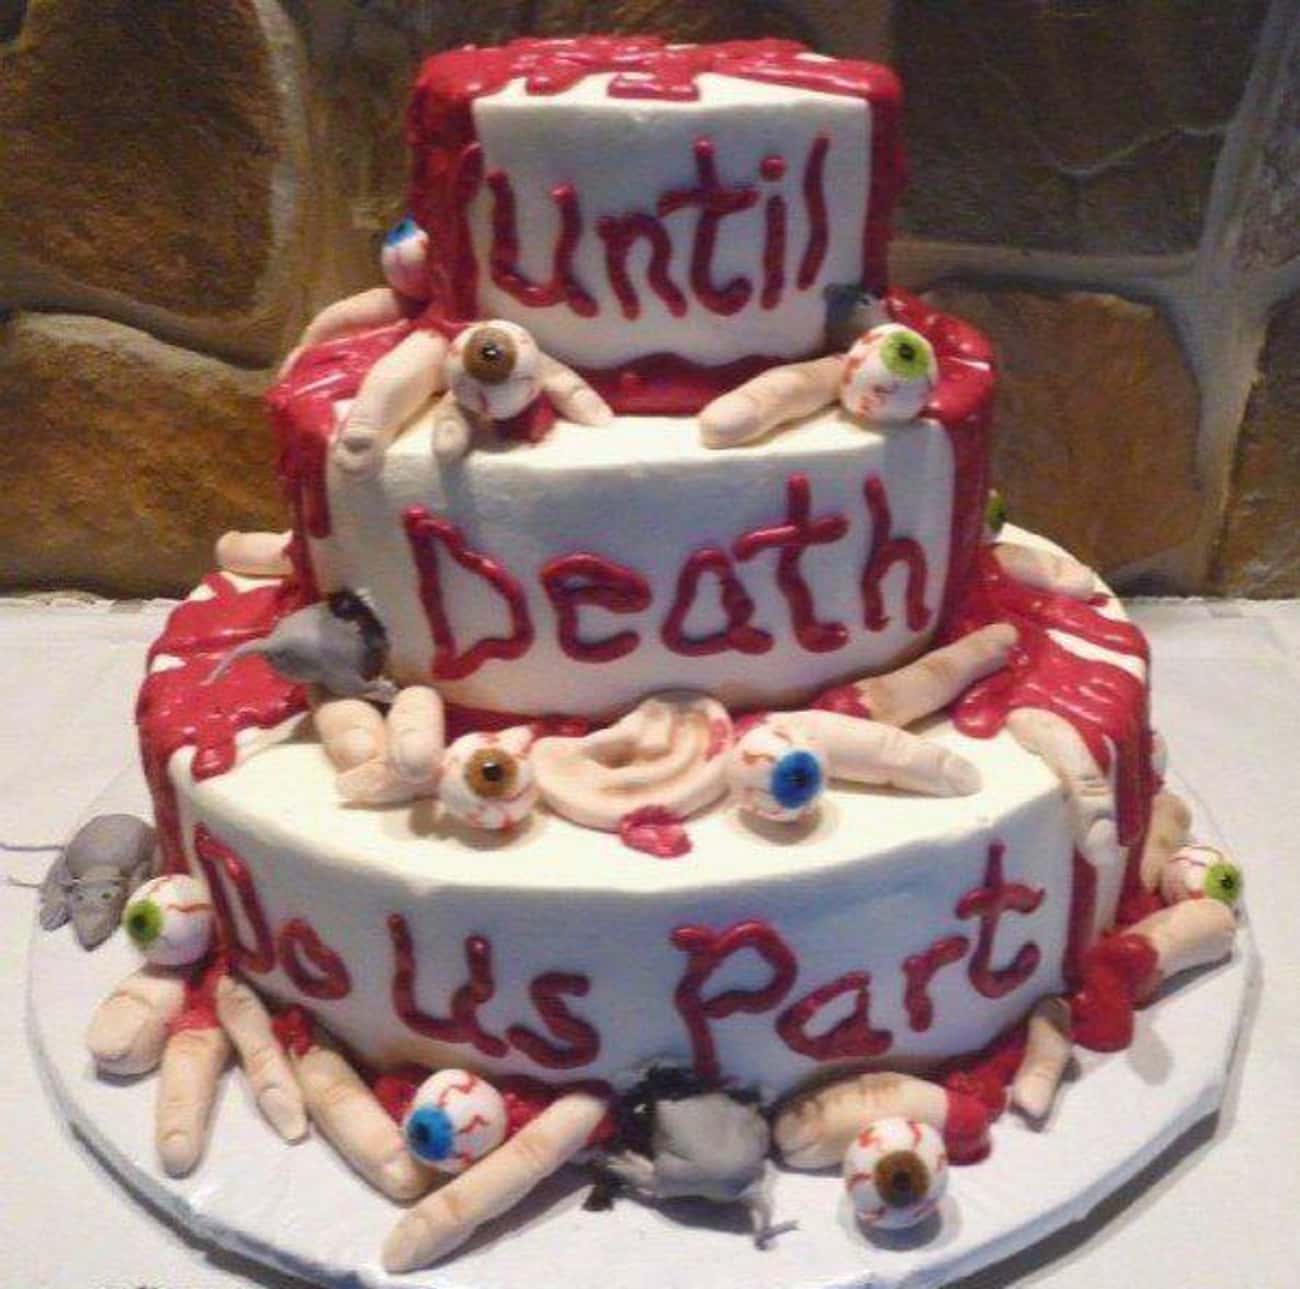 I hope that this couple had a wonderful wedding and that the cake tasted better than it looked.